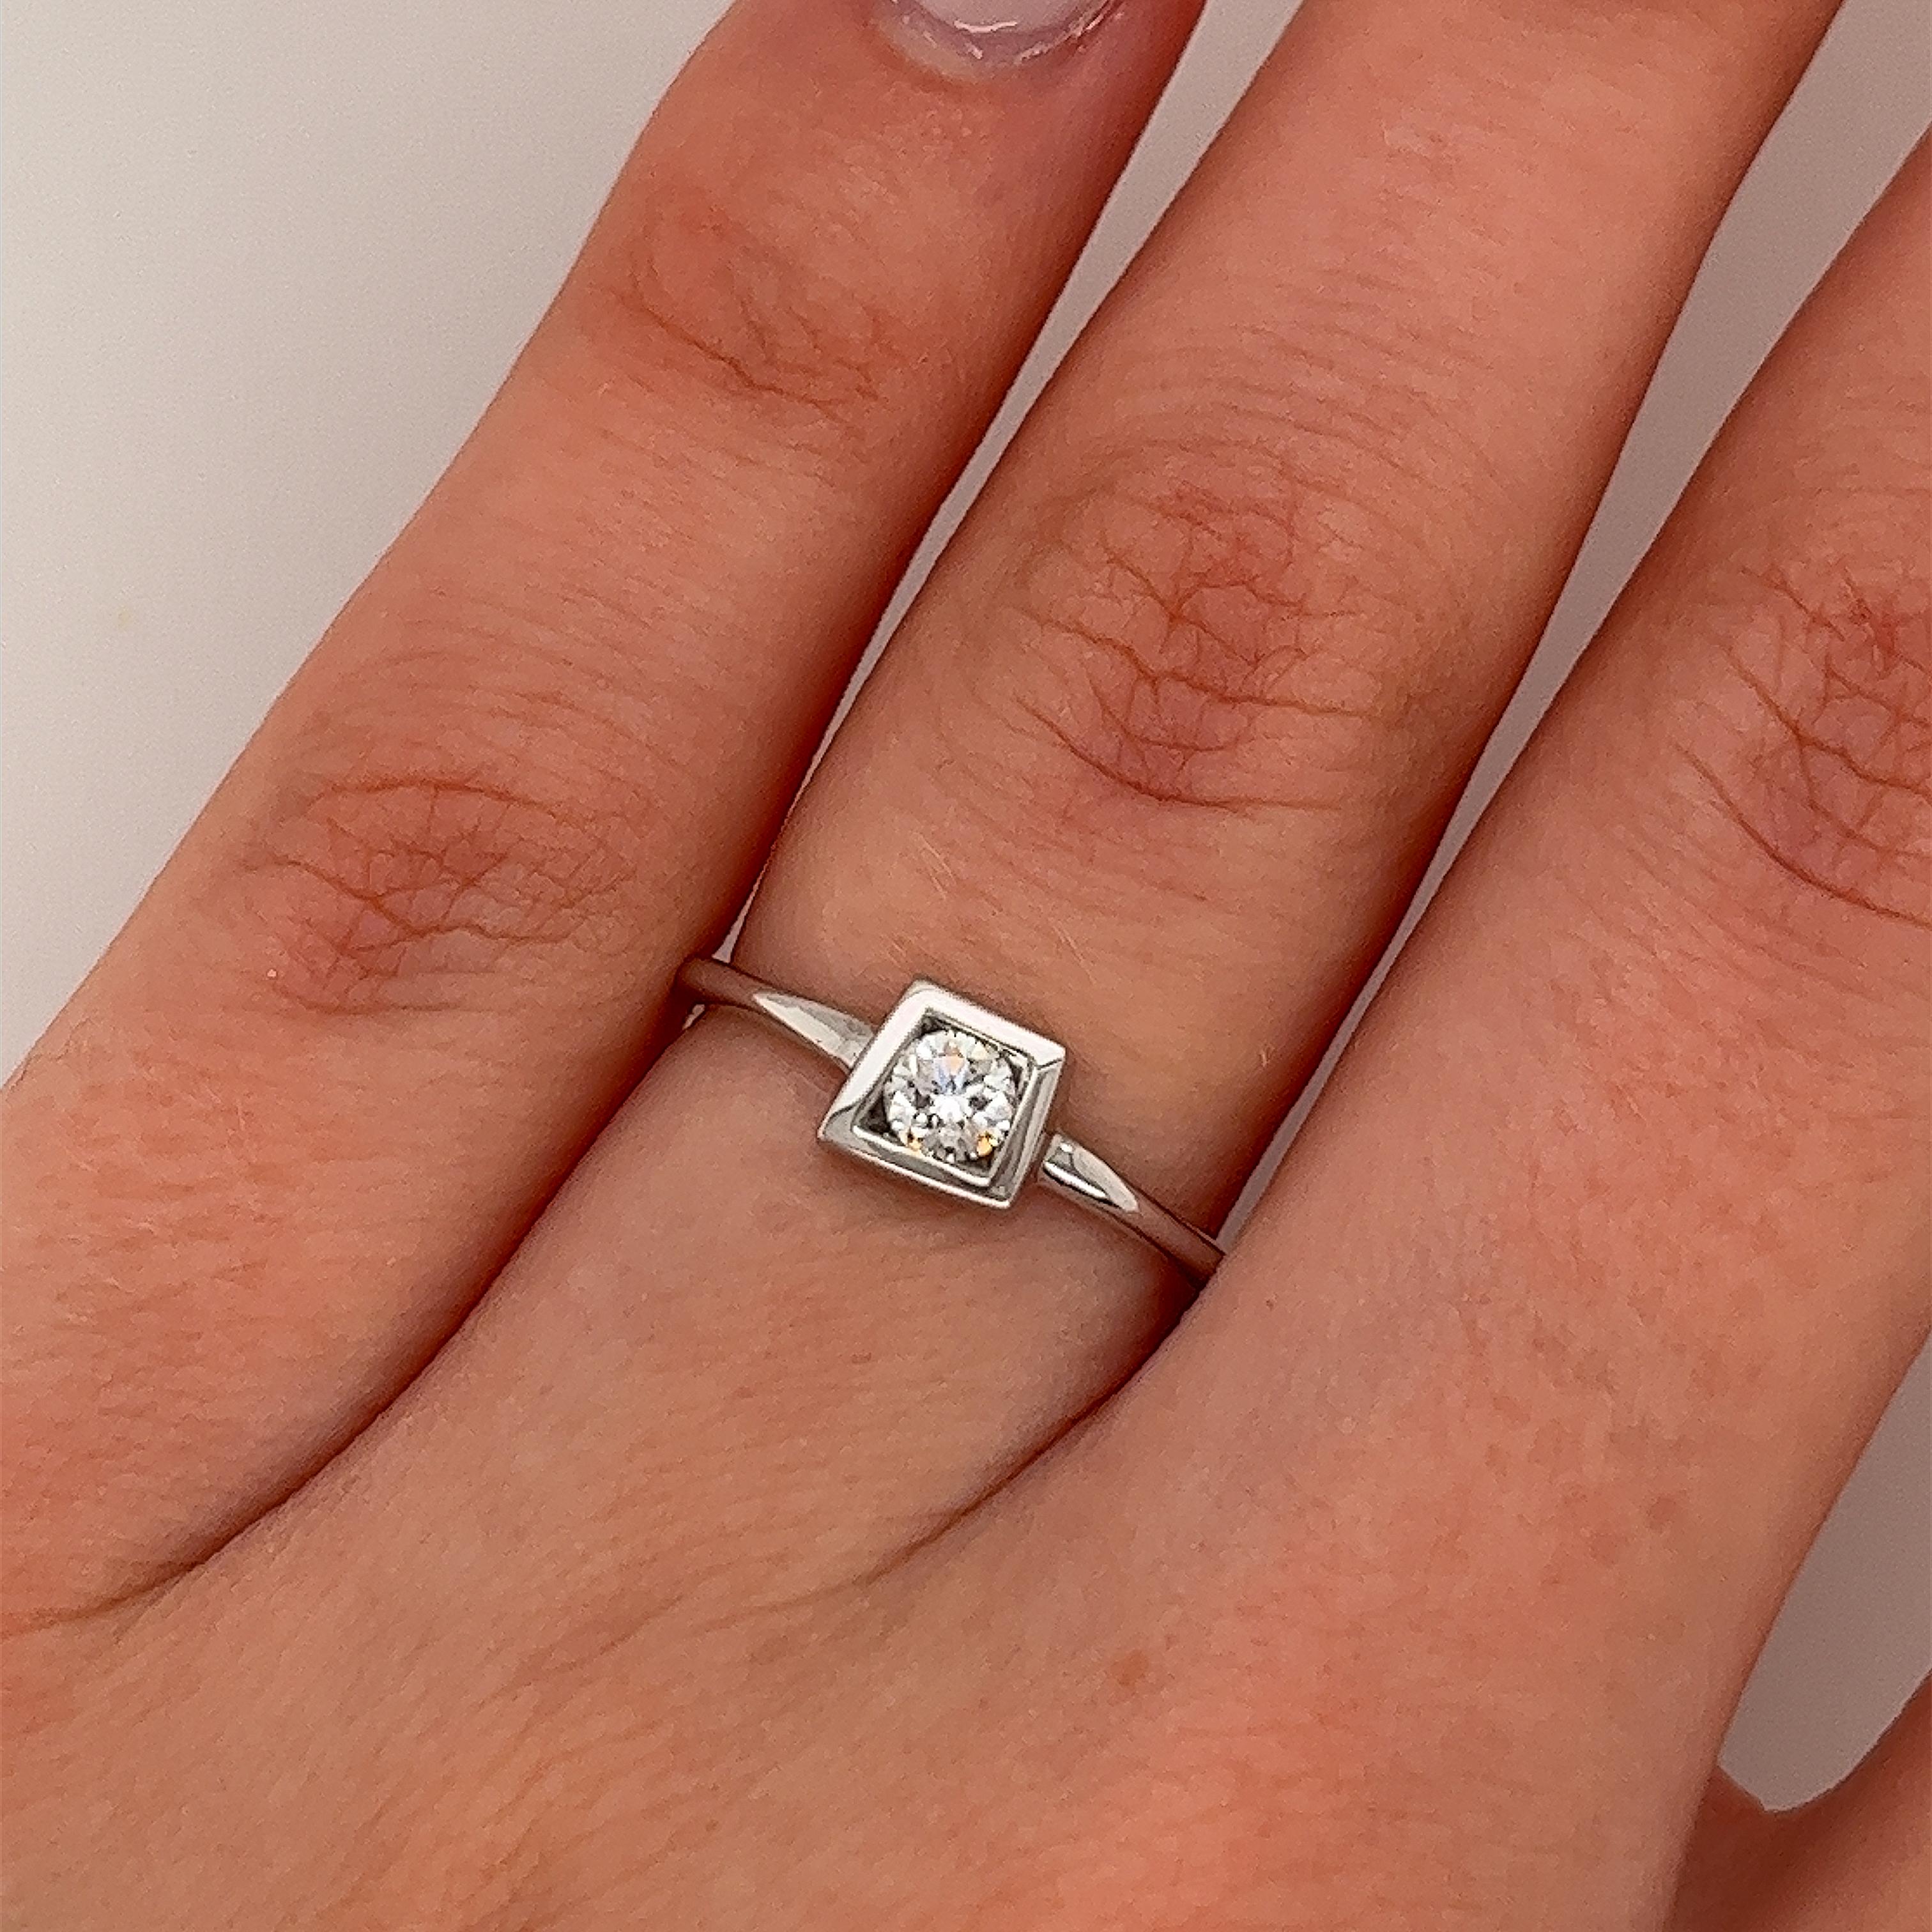 Women's Tiffany & Co. Frank Gehry Solitaire Ring in 18ct White Gold with 0.15ct diamond